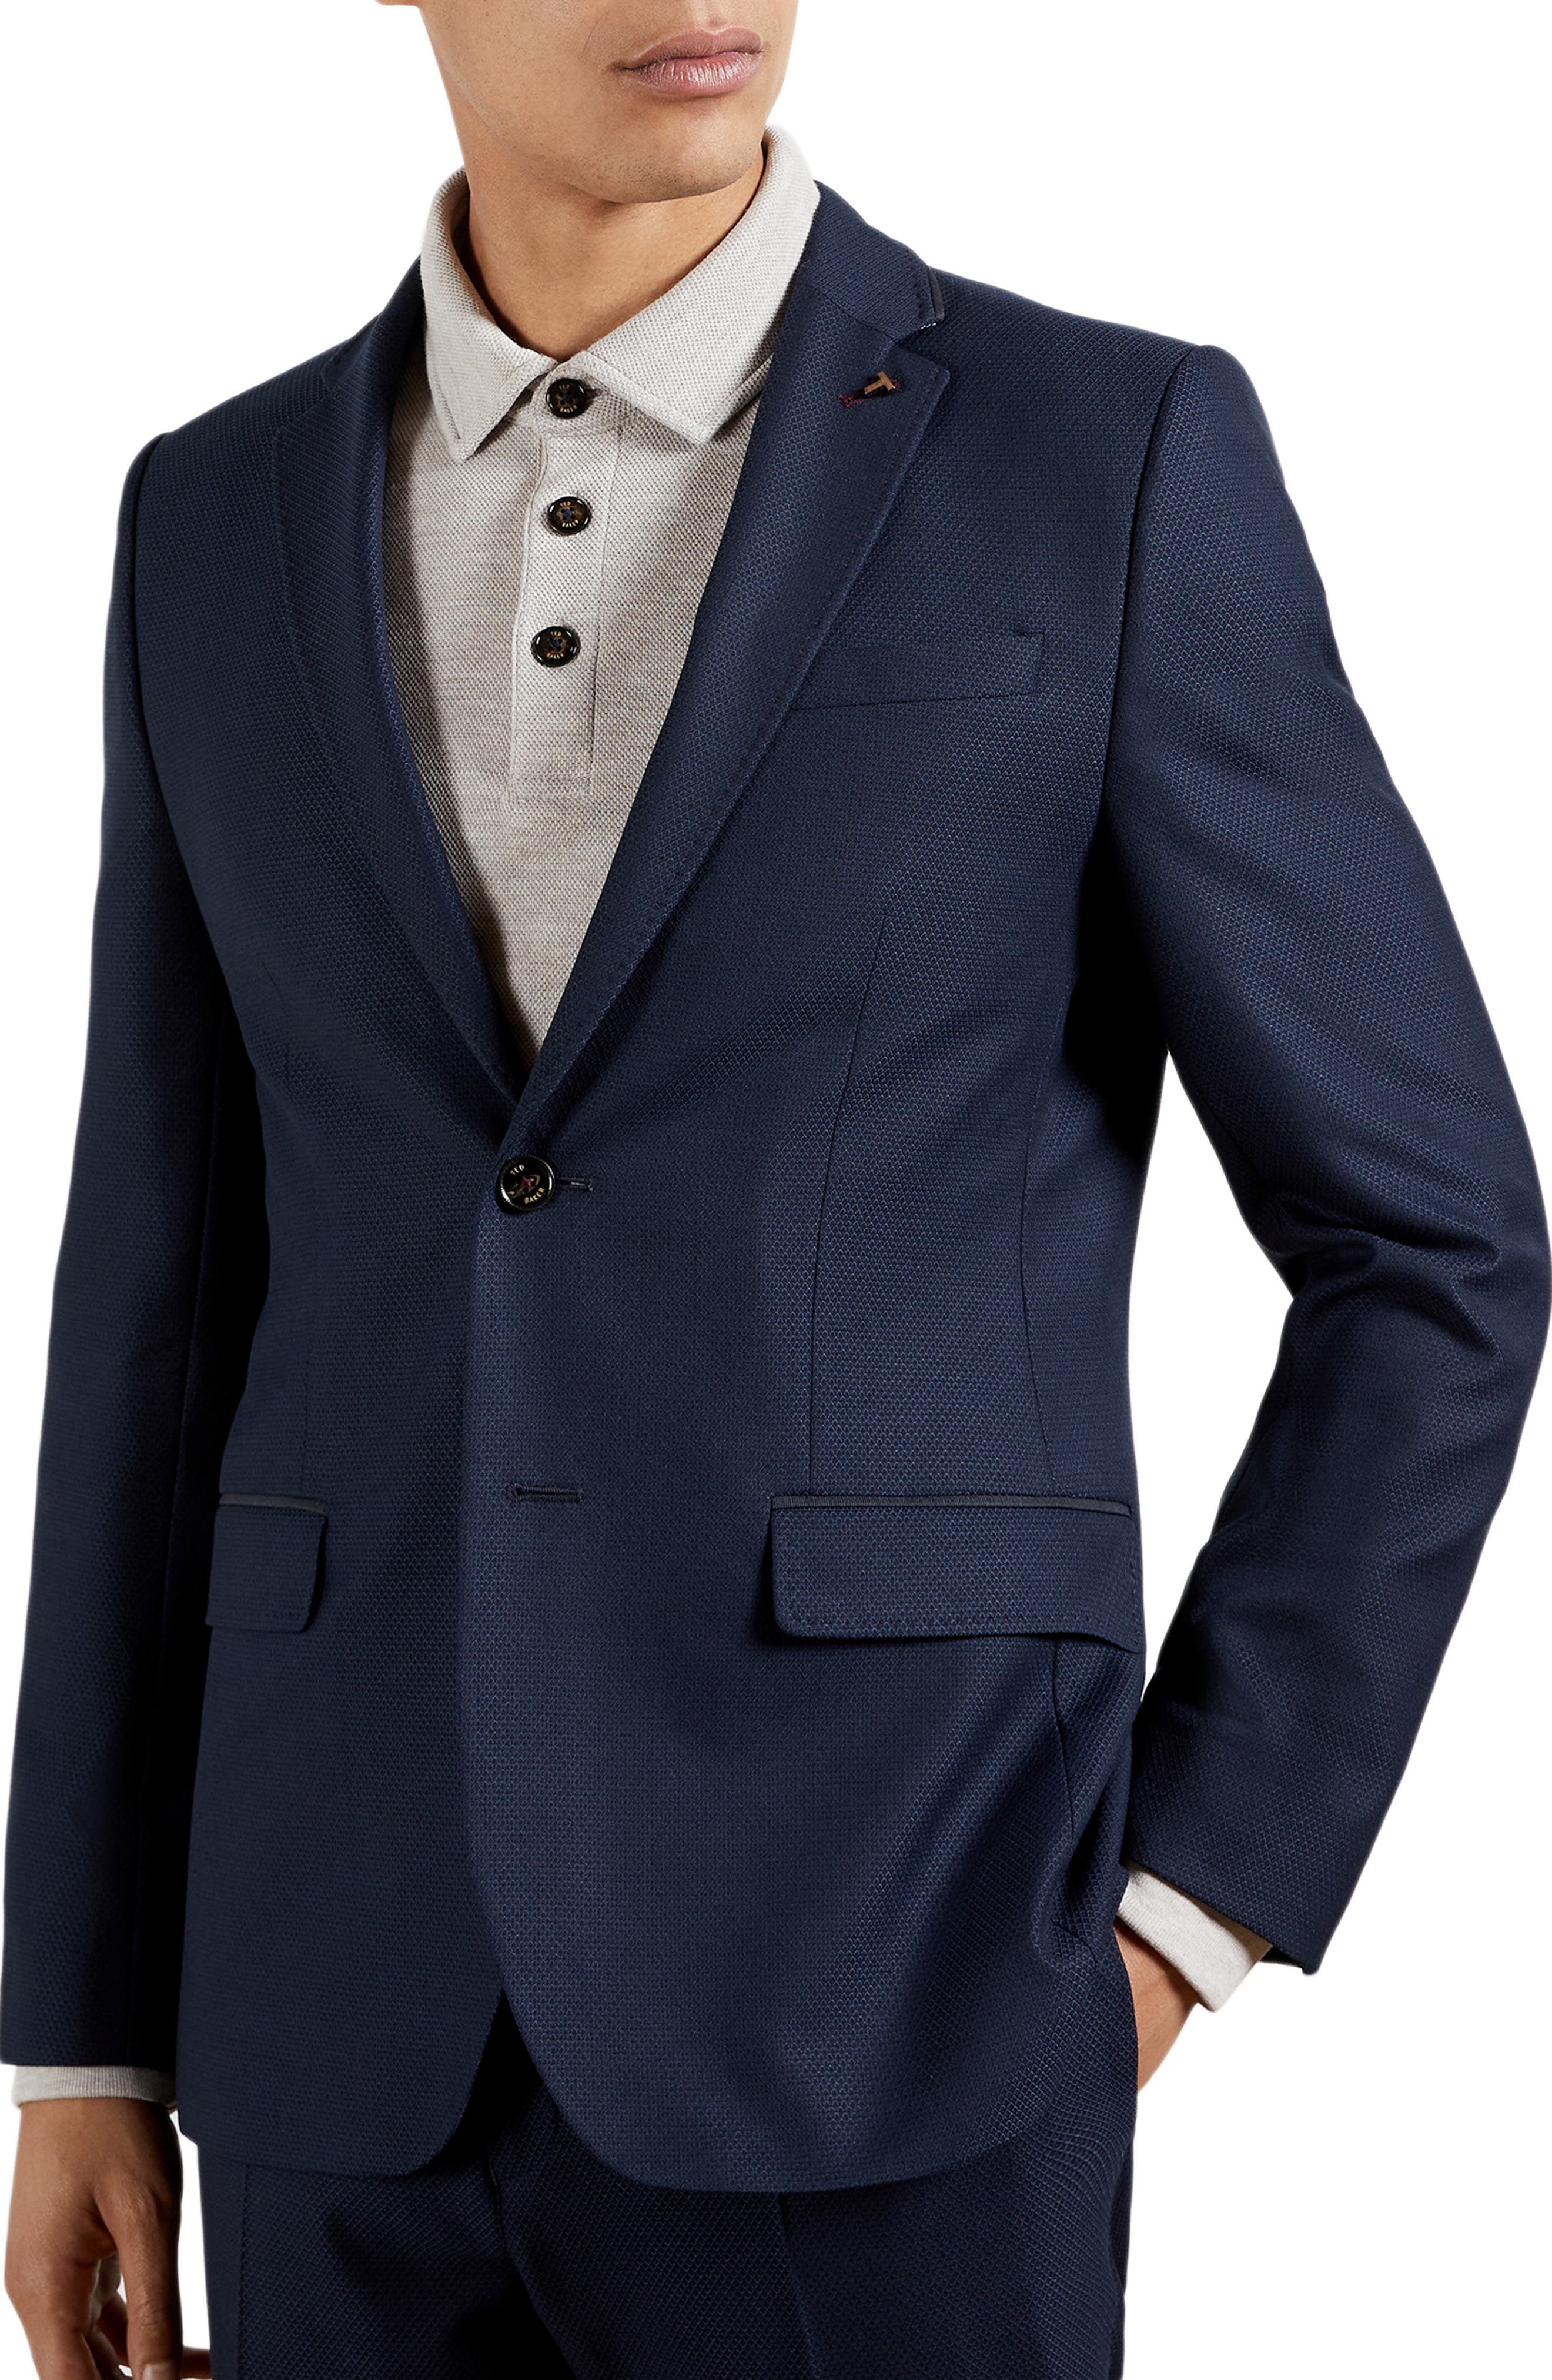 Men's Ted Baker London Sportcoats - Best Deals You Need To See